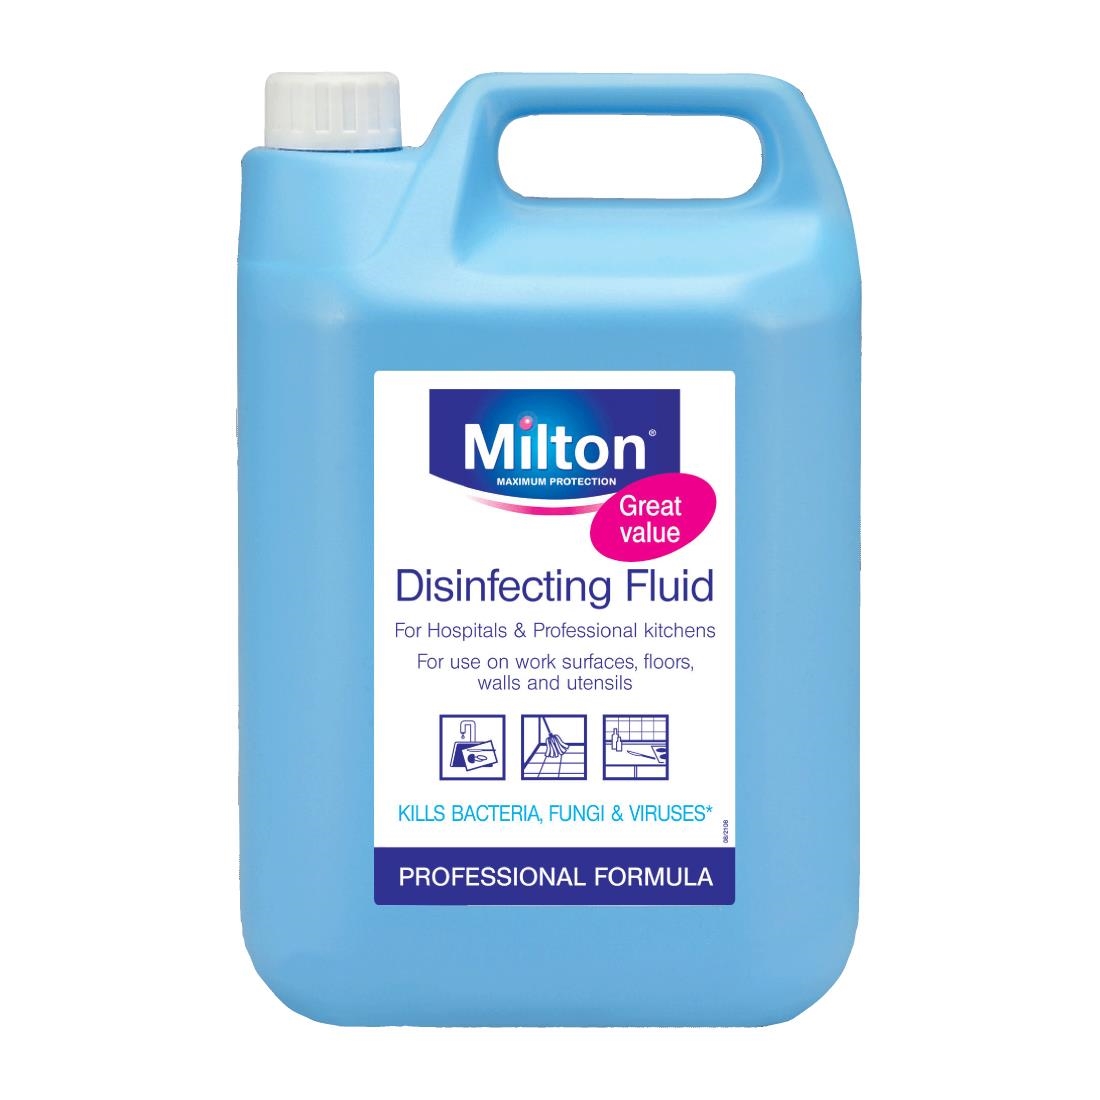 Milton Professional Disinfecting Fluid 5Ltr Pack of 2 (DX567)